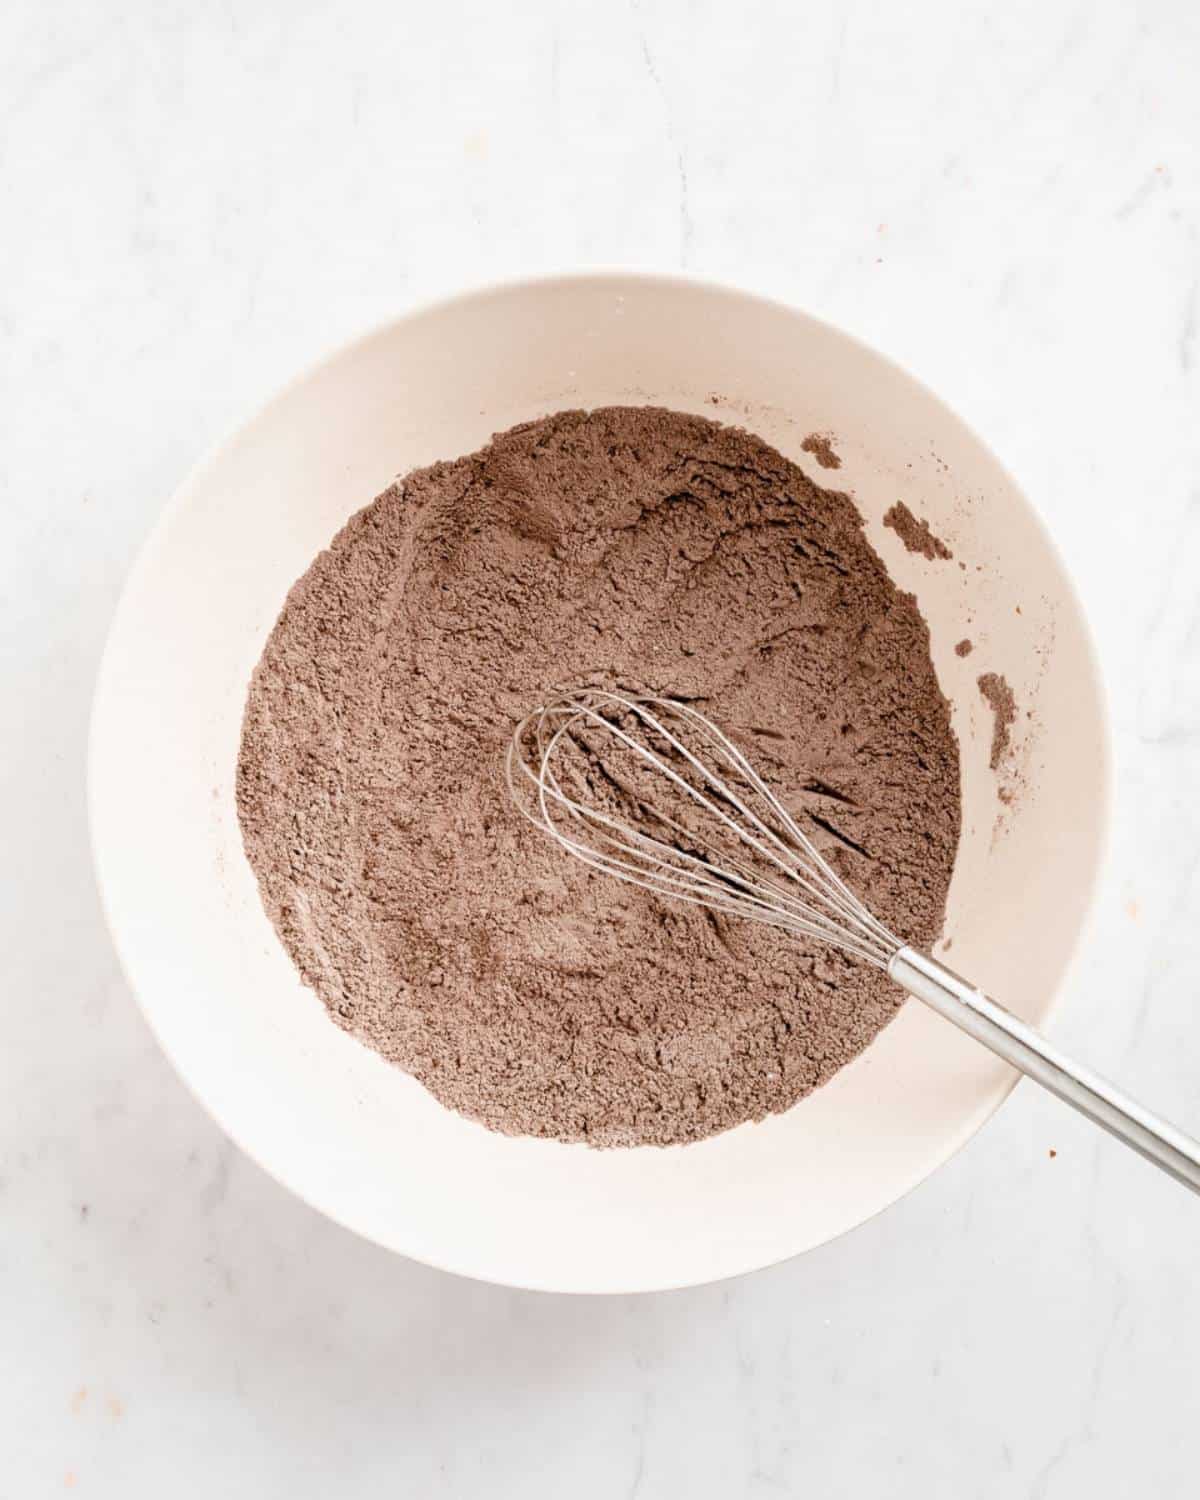 flour, cocoa powder, baking powder, salt, pumpkin pie spice in a big mixing bowl whisked together.